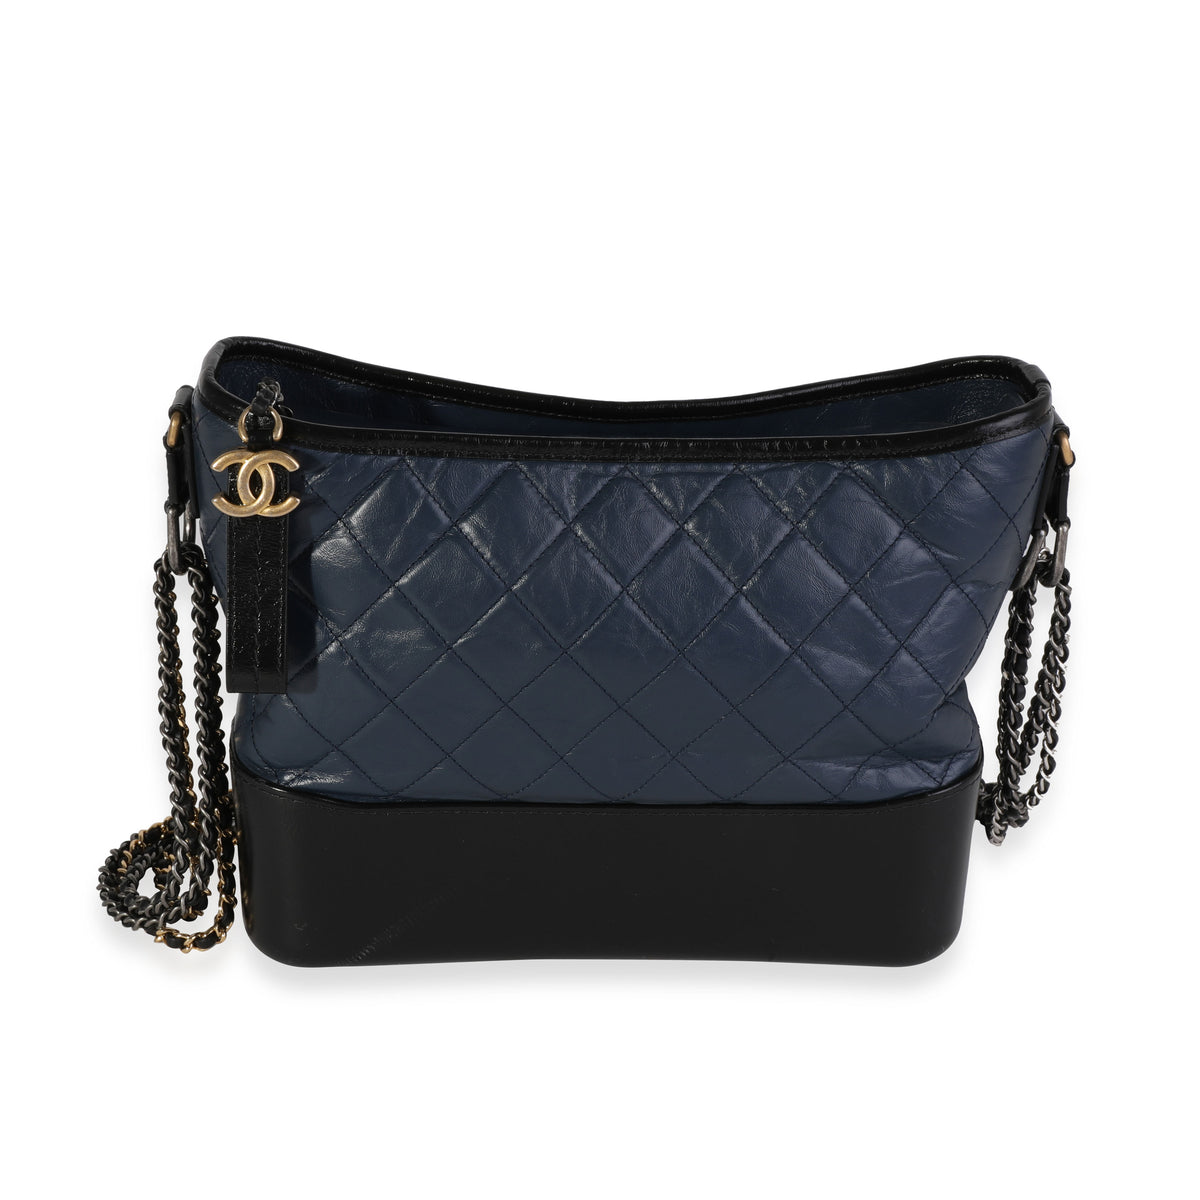 Chanel Silver Quilted Leather Small Gabrielle Hobo Bag - Yoogi's Closet